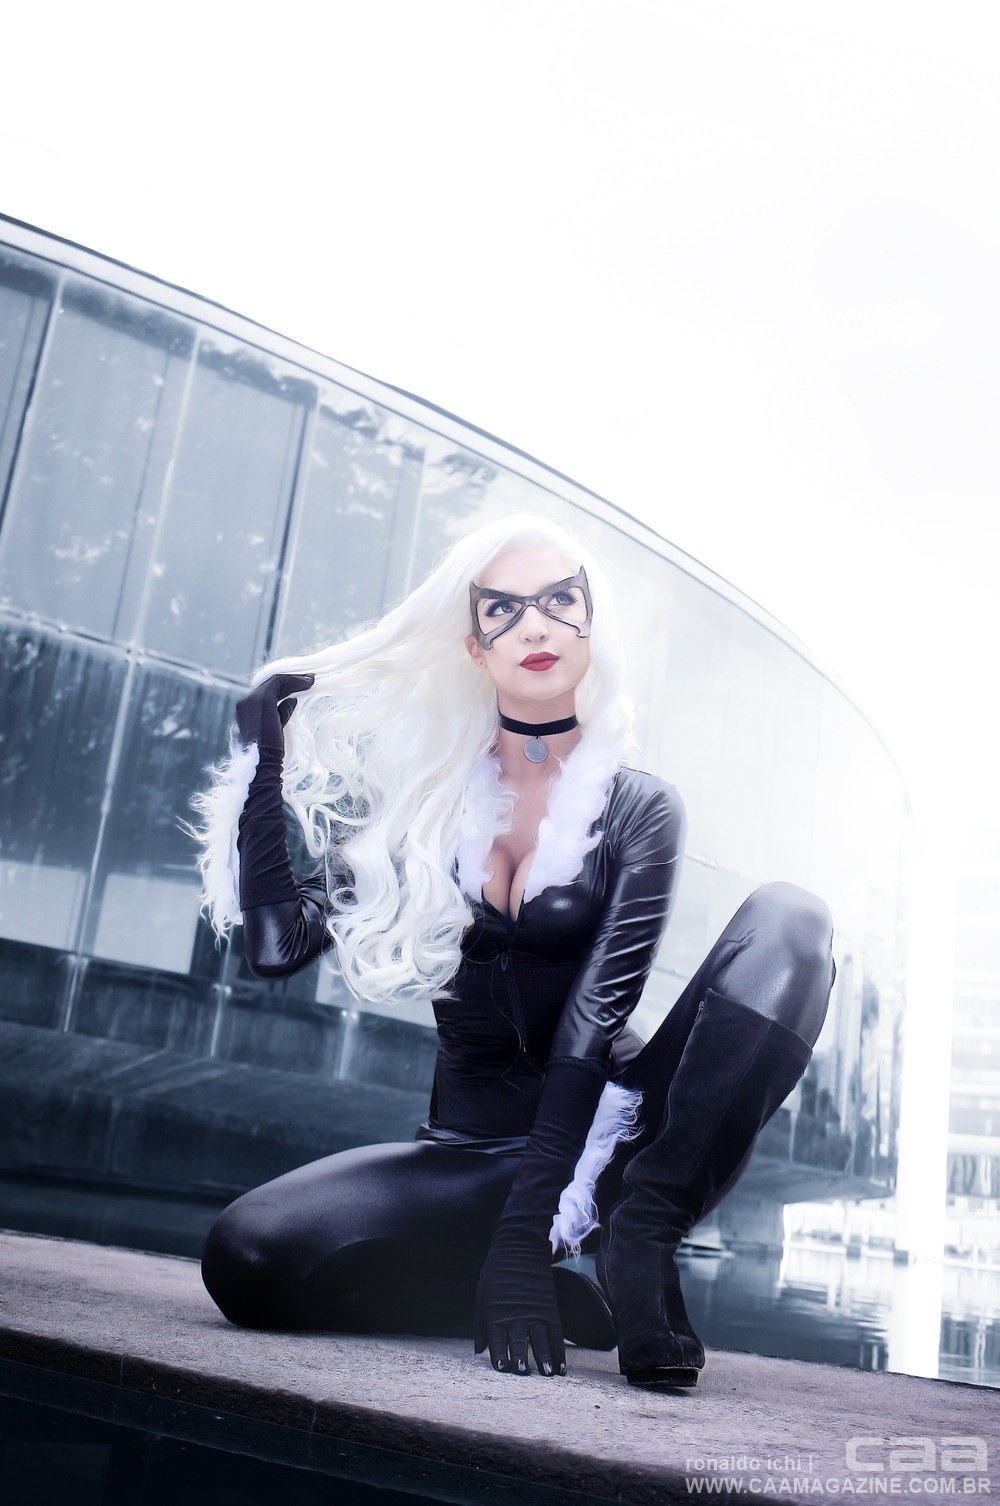 Camicosplayer Cami Cosplayer As Black Cat